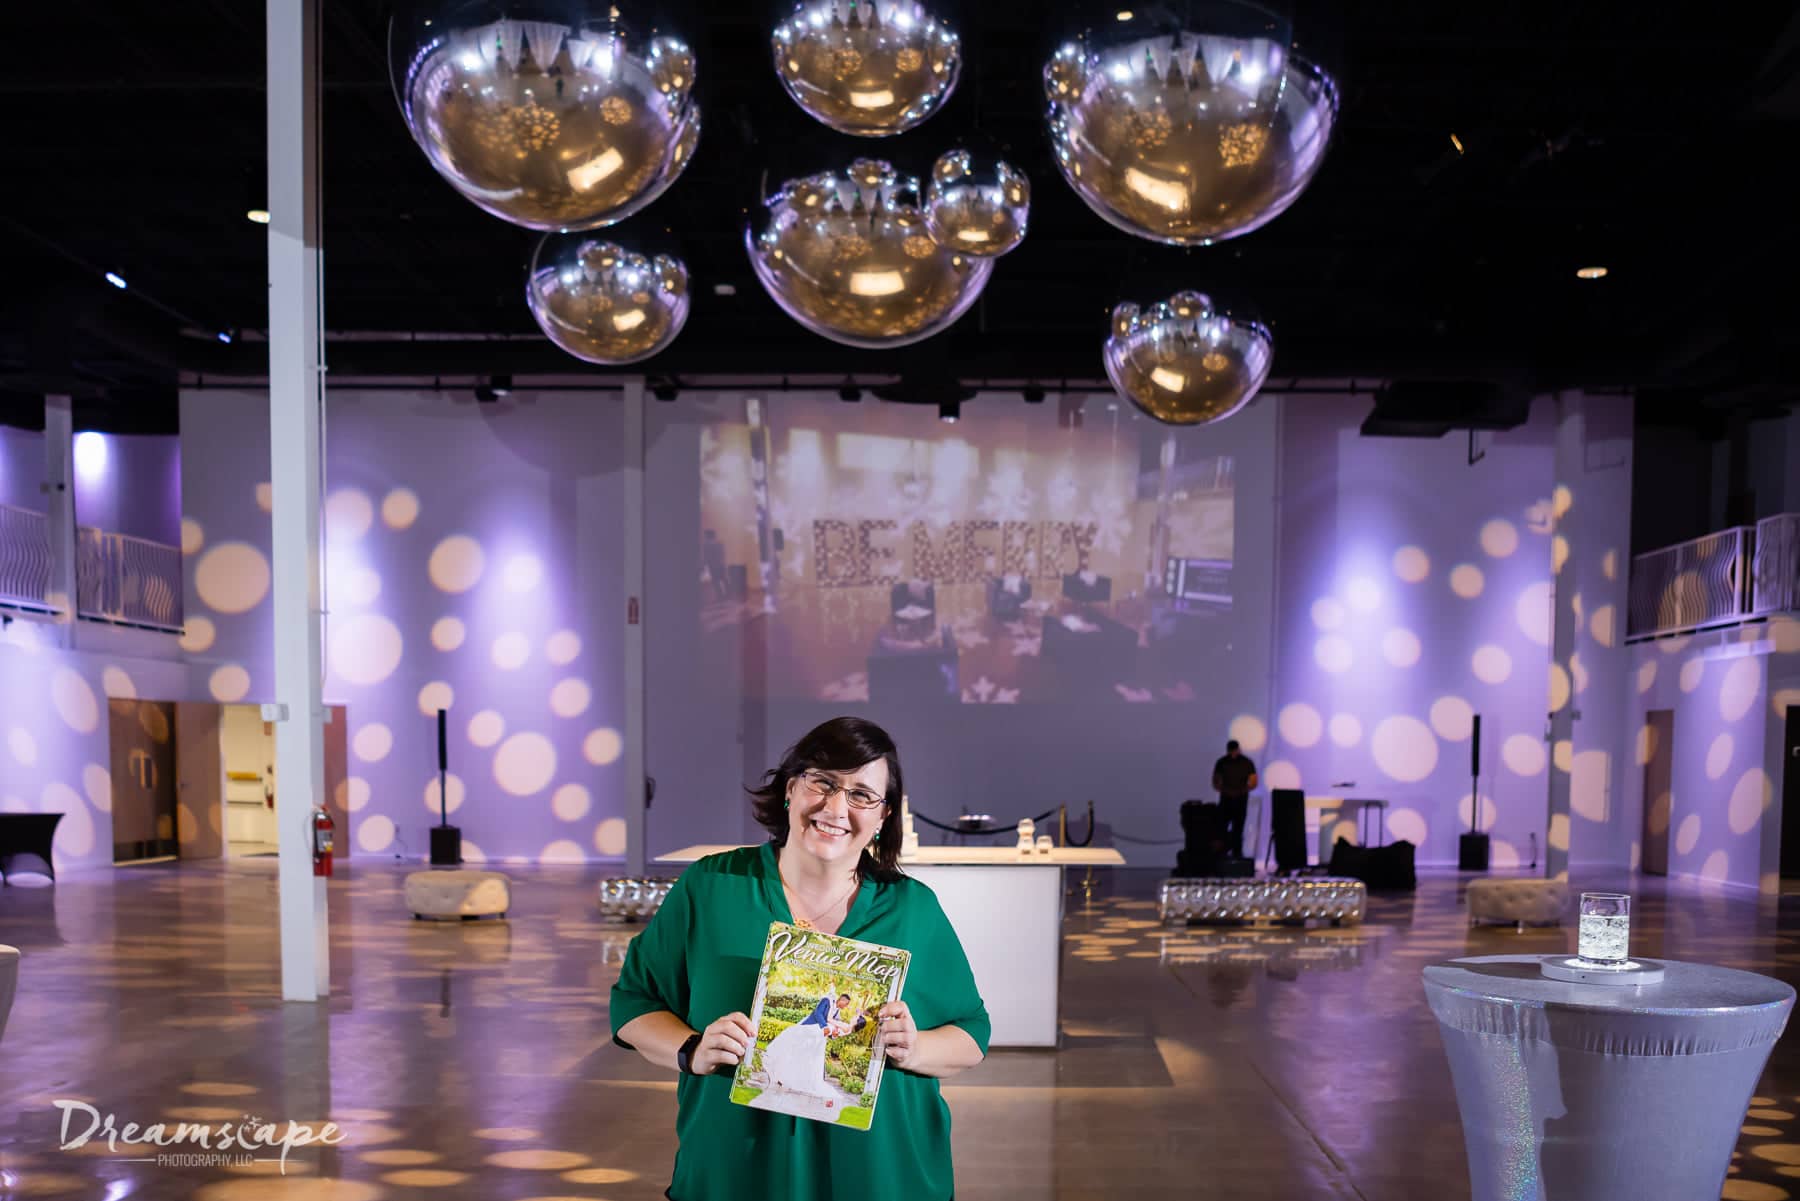 woman with glasses and short brown hair wearing green shirt holding map in front of venue space with big silver balls hanging from ceiling new map celebration at Canvas Event Venue